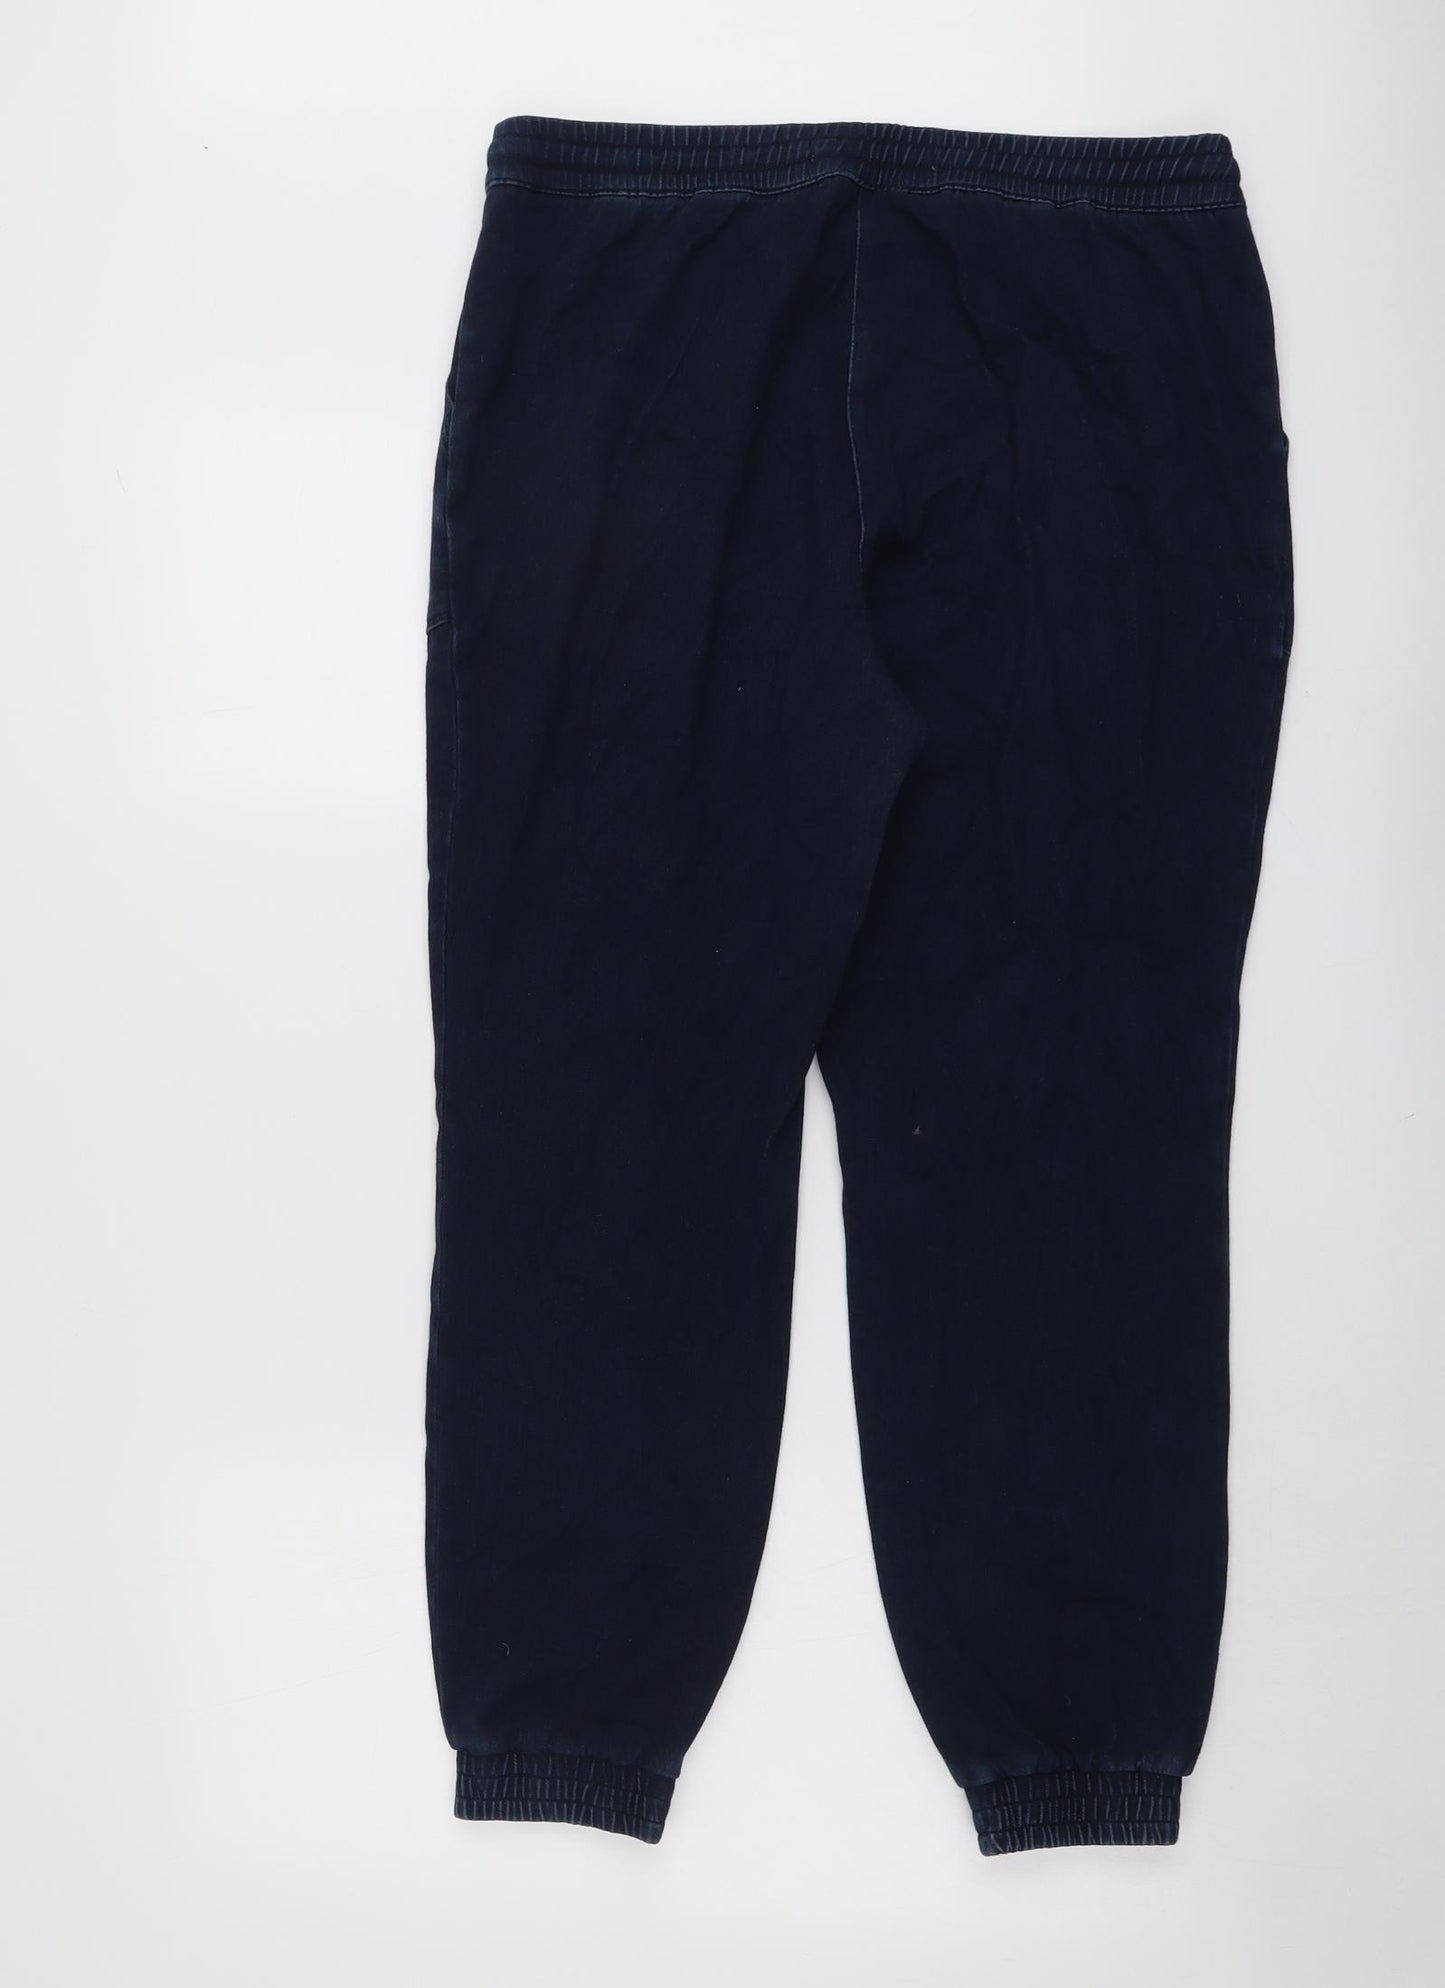 NEXT Womens Blue Cotton Jogger Trousers Size 14 L27 in Regular Drawstring